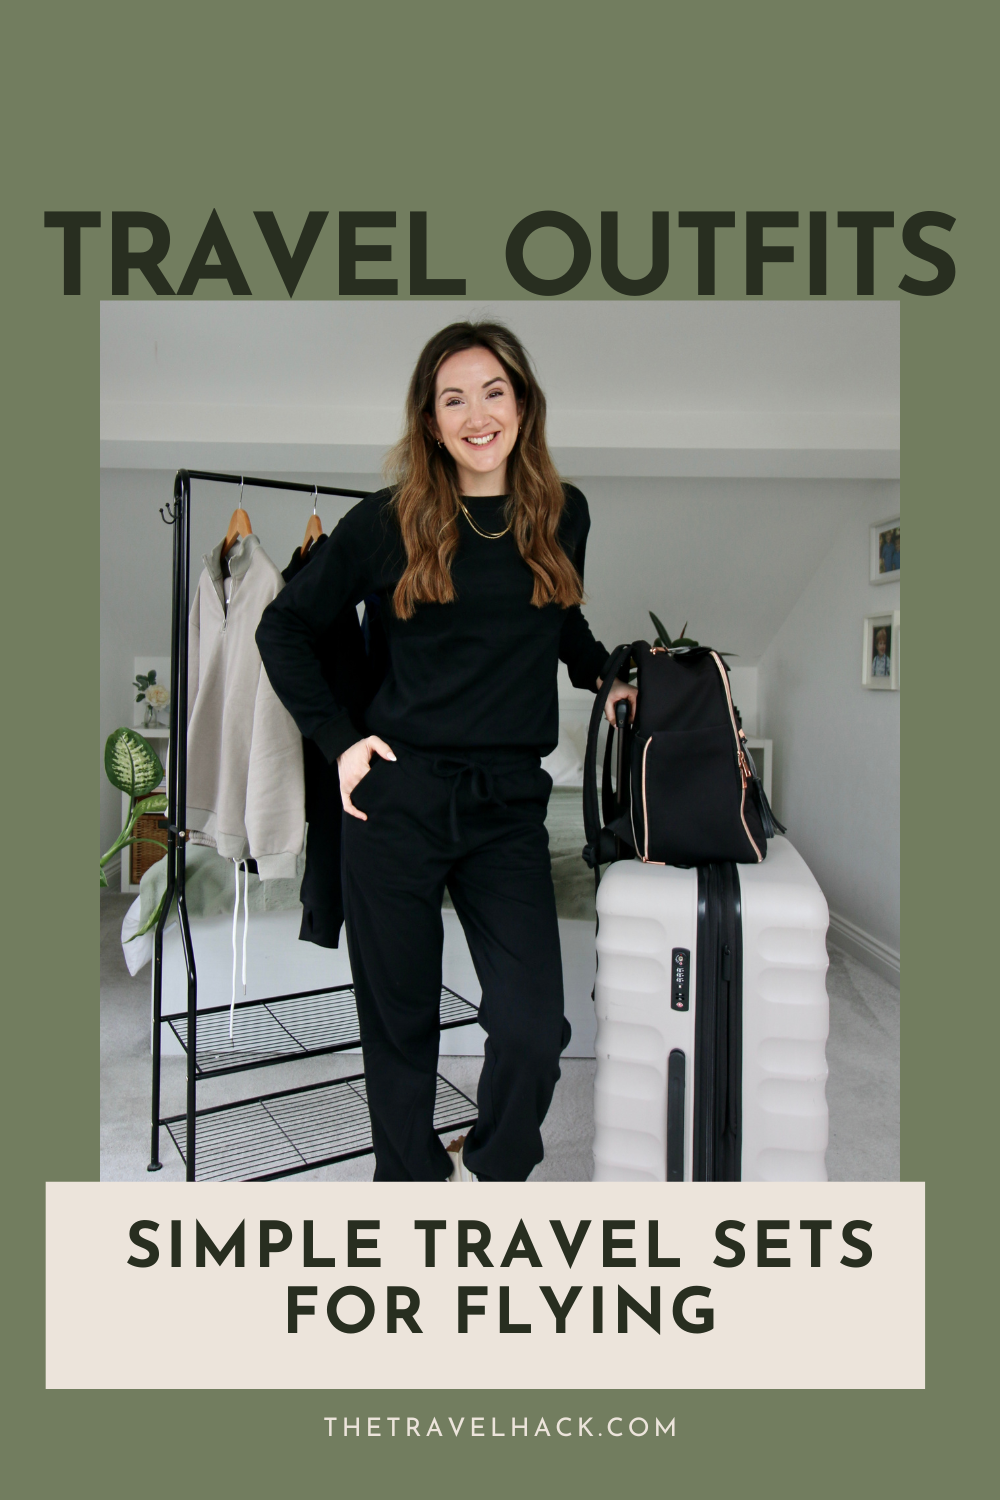 Best ladies travel outfits and travel sets